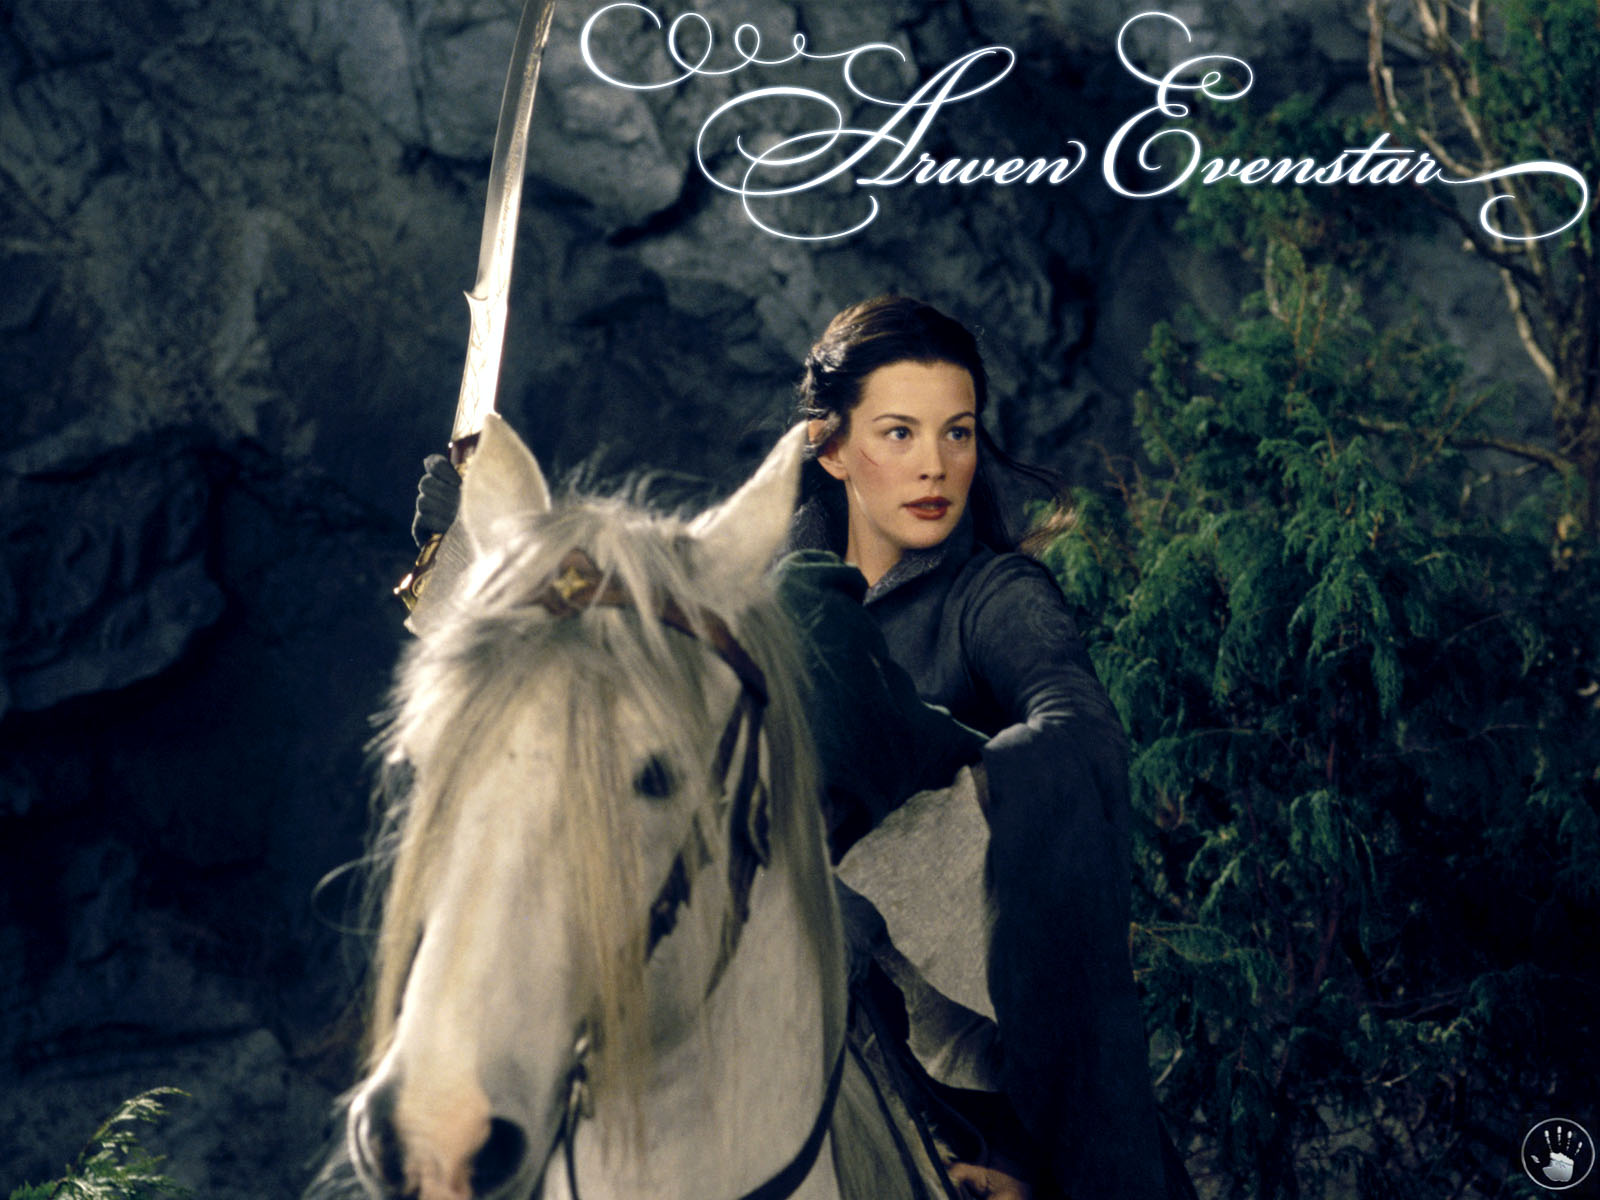 Arwen Und Miel Image Fellowship Of The Ring